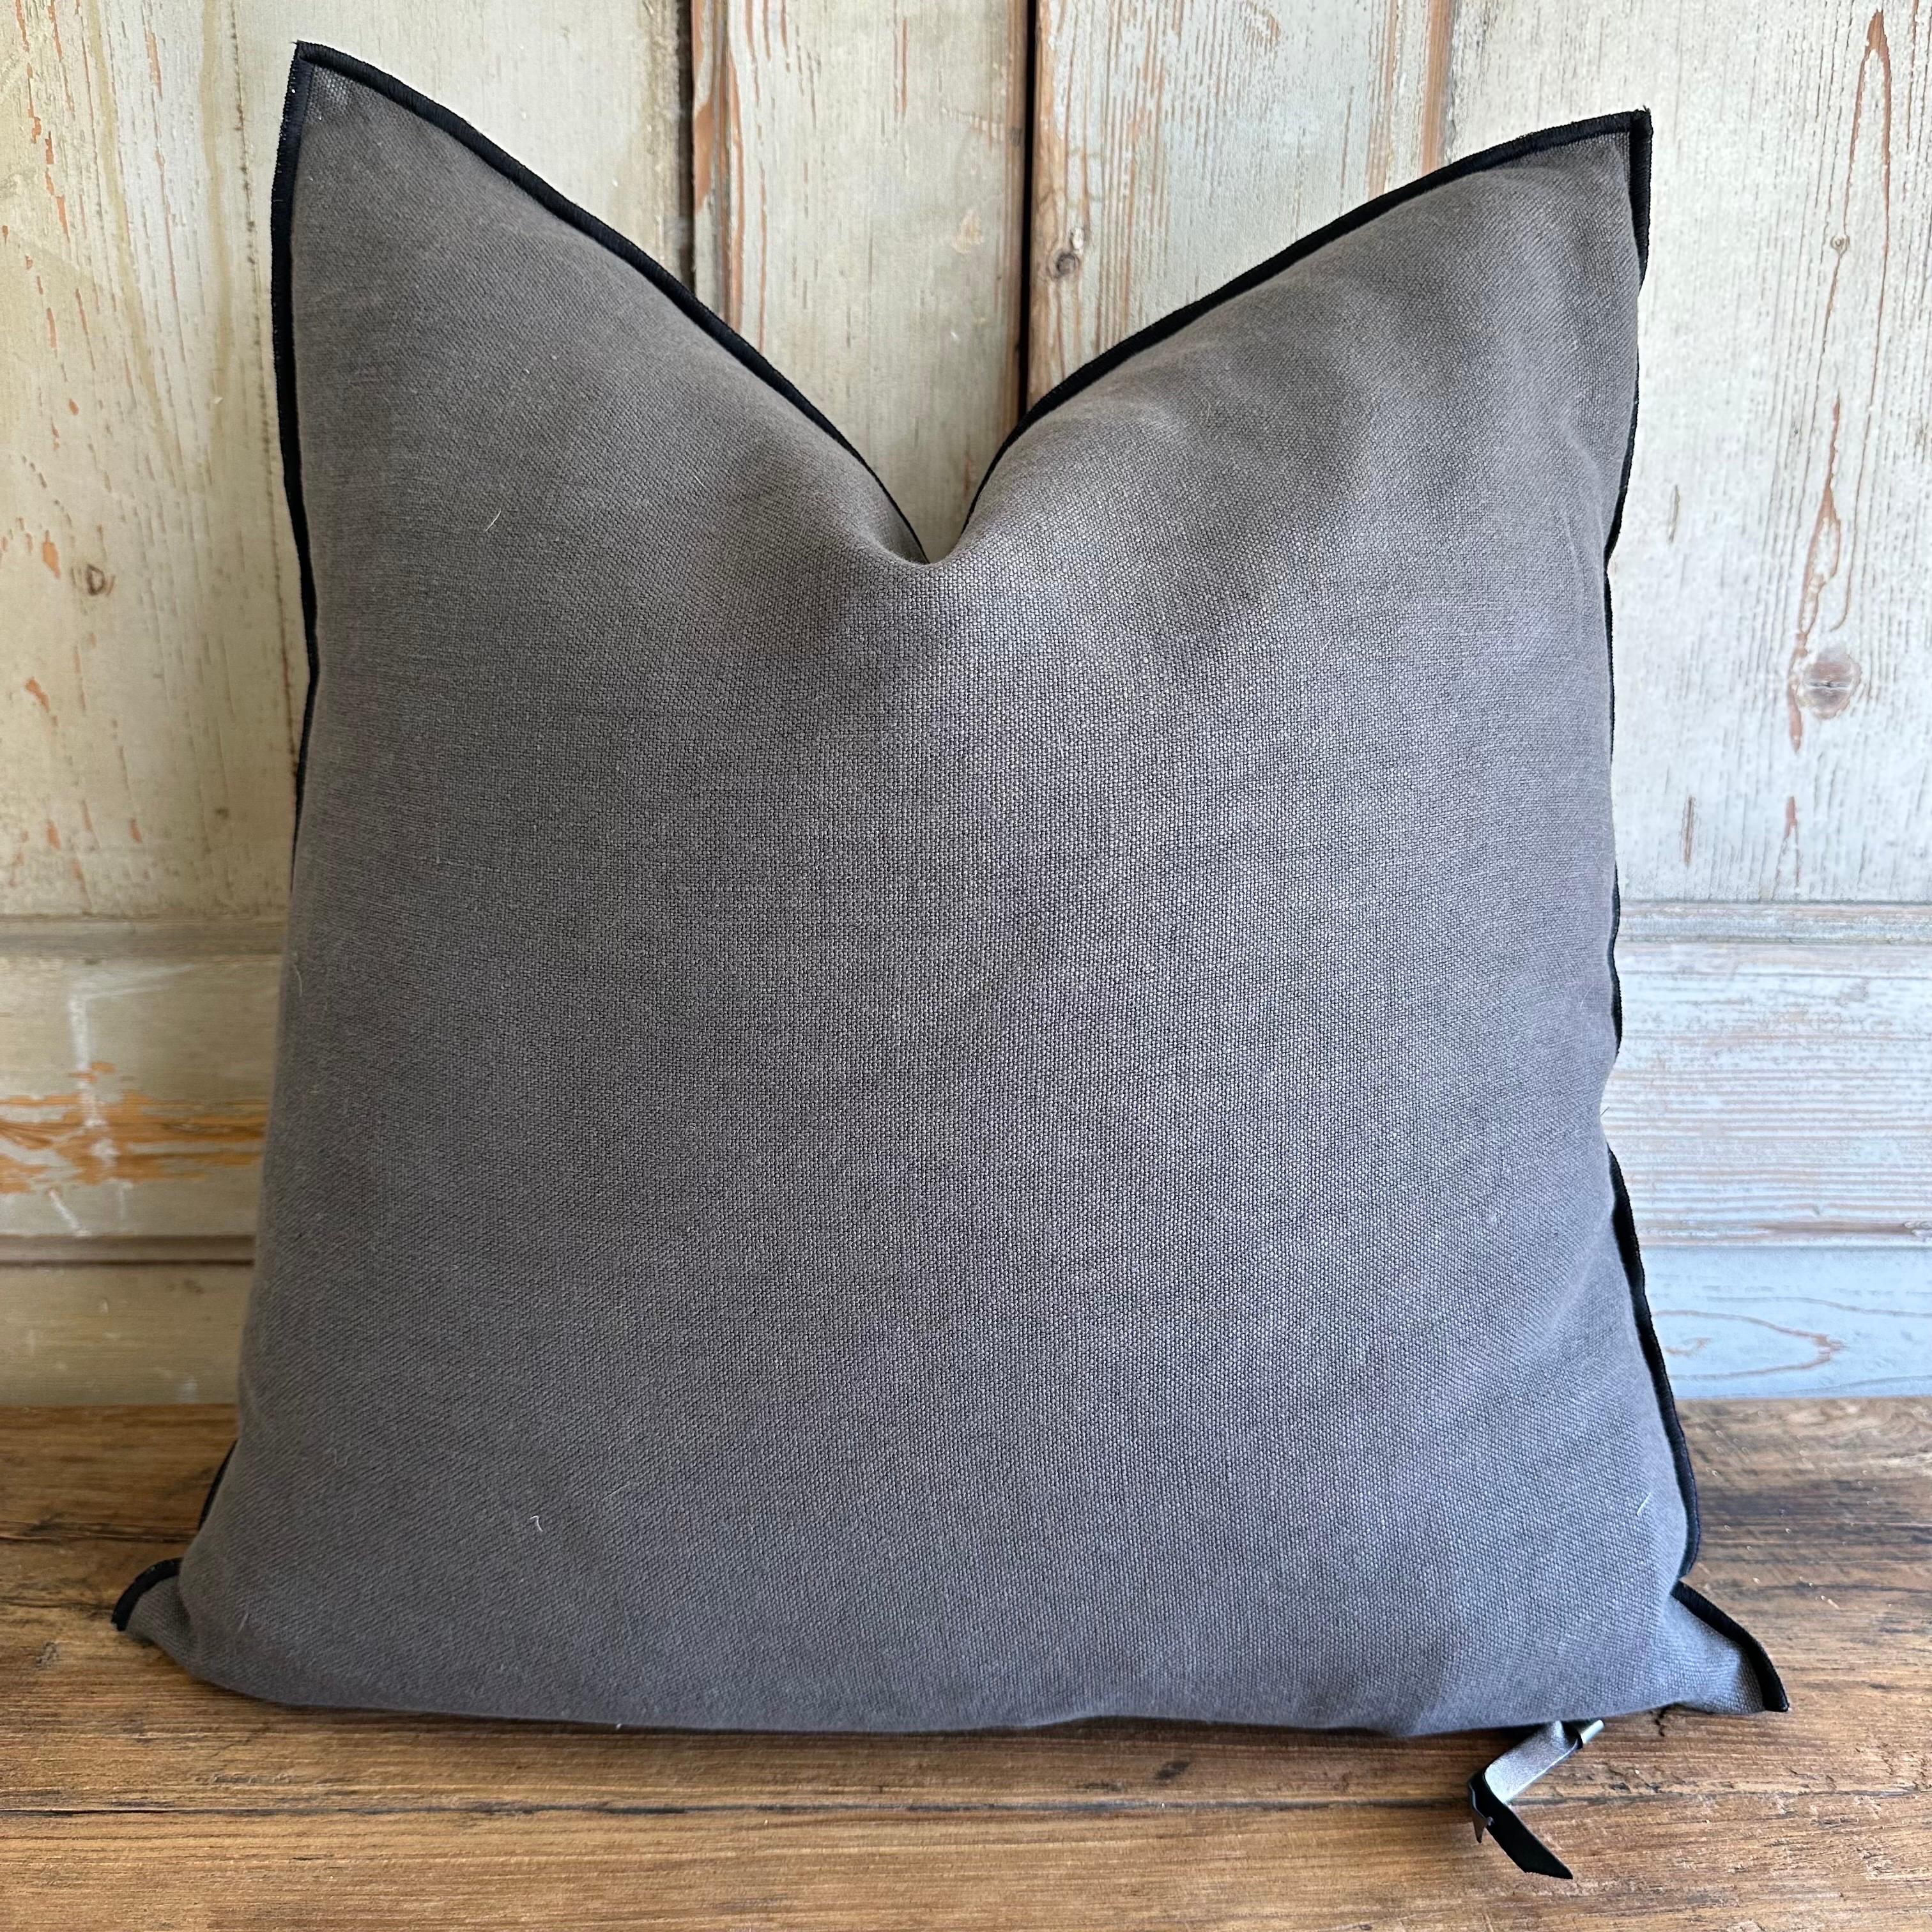 Custom linen blend accent pillow.
Color: castor a dark camoflauge grey colored nubby textured style pillow with a stitched edge, metal zipper closure. 
Includes feather / down insert.
Our pillows are constructed with vintage one of a kind